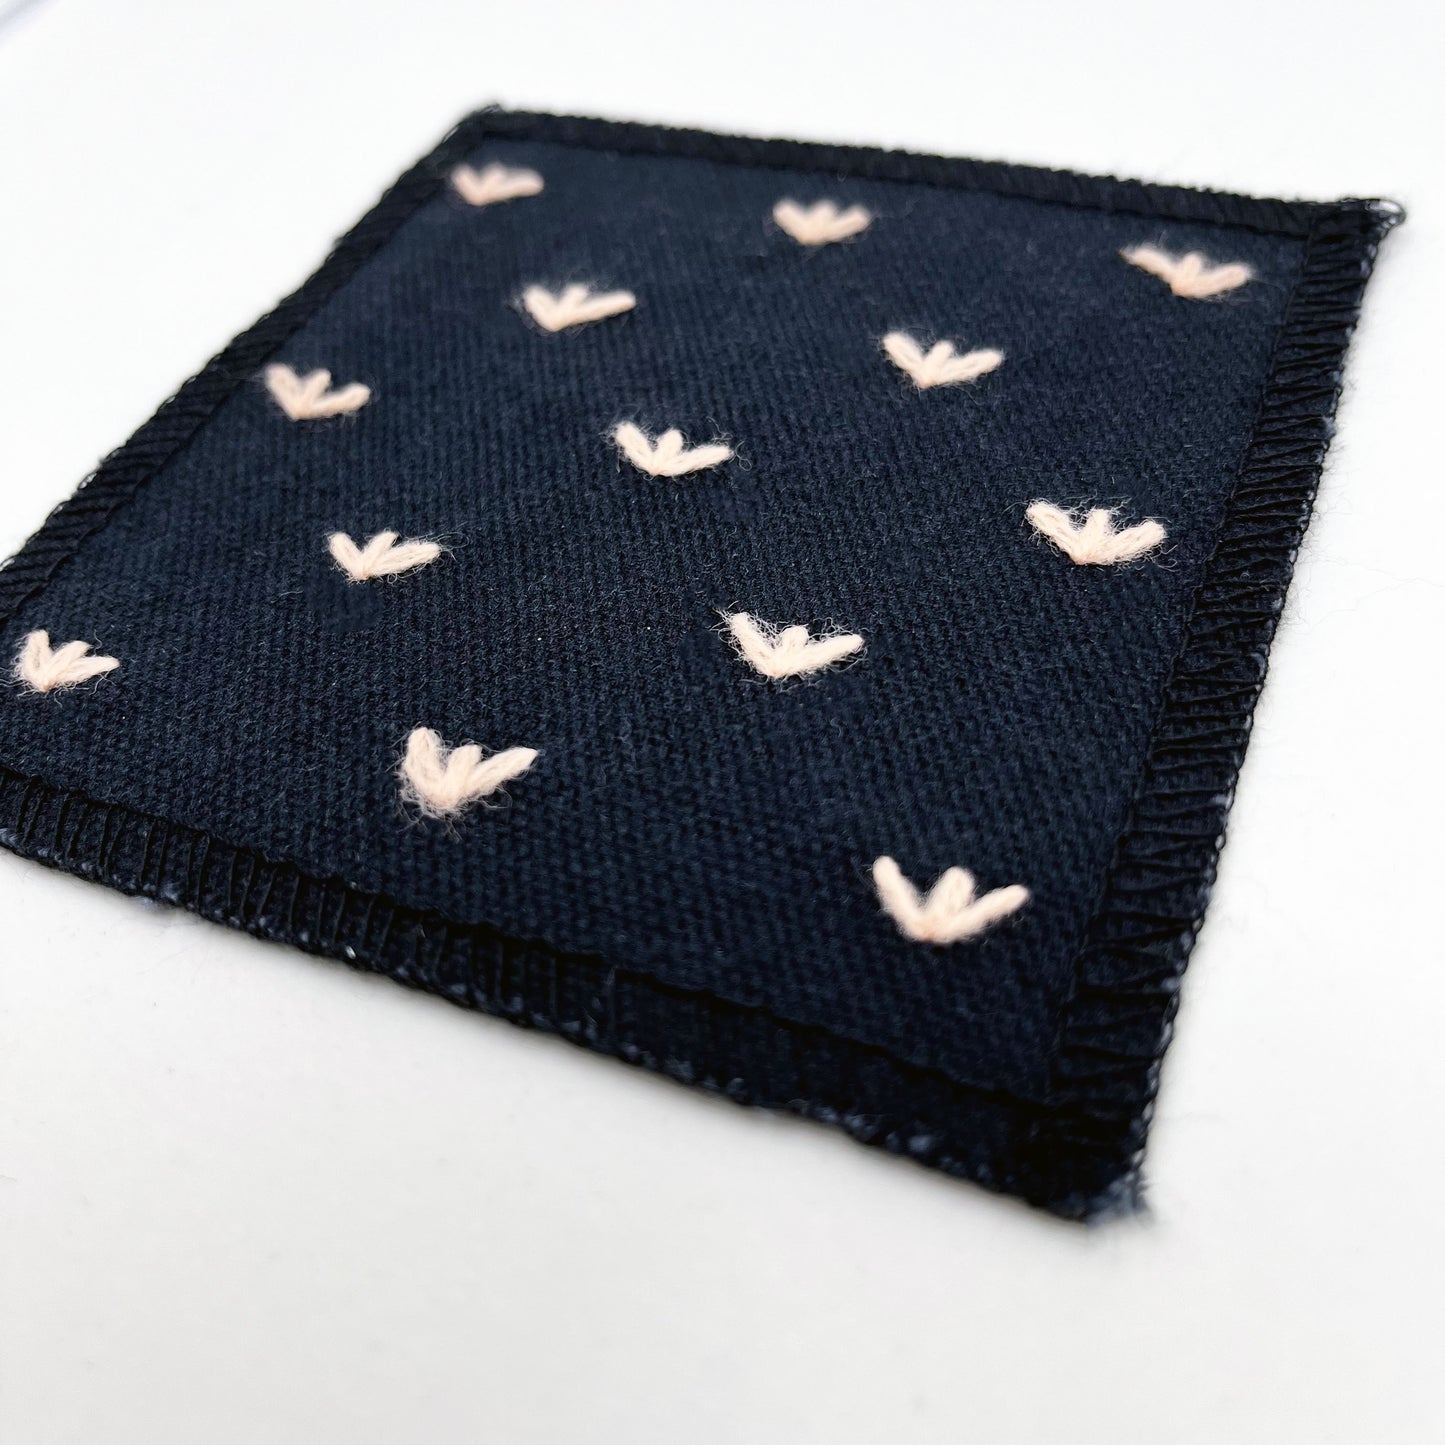 a close up angled view of a square black canvas patch, with peach stitches that look like birds feet or sprouts spread out in a diamond pattern, with overlocked edges, on a white background